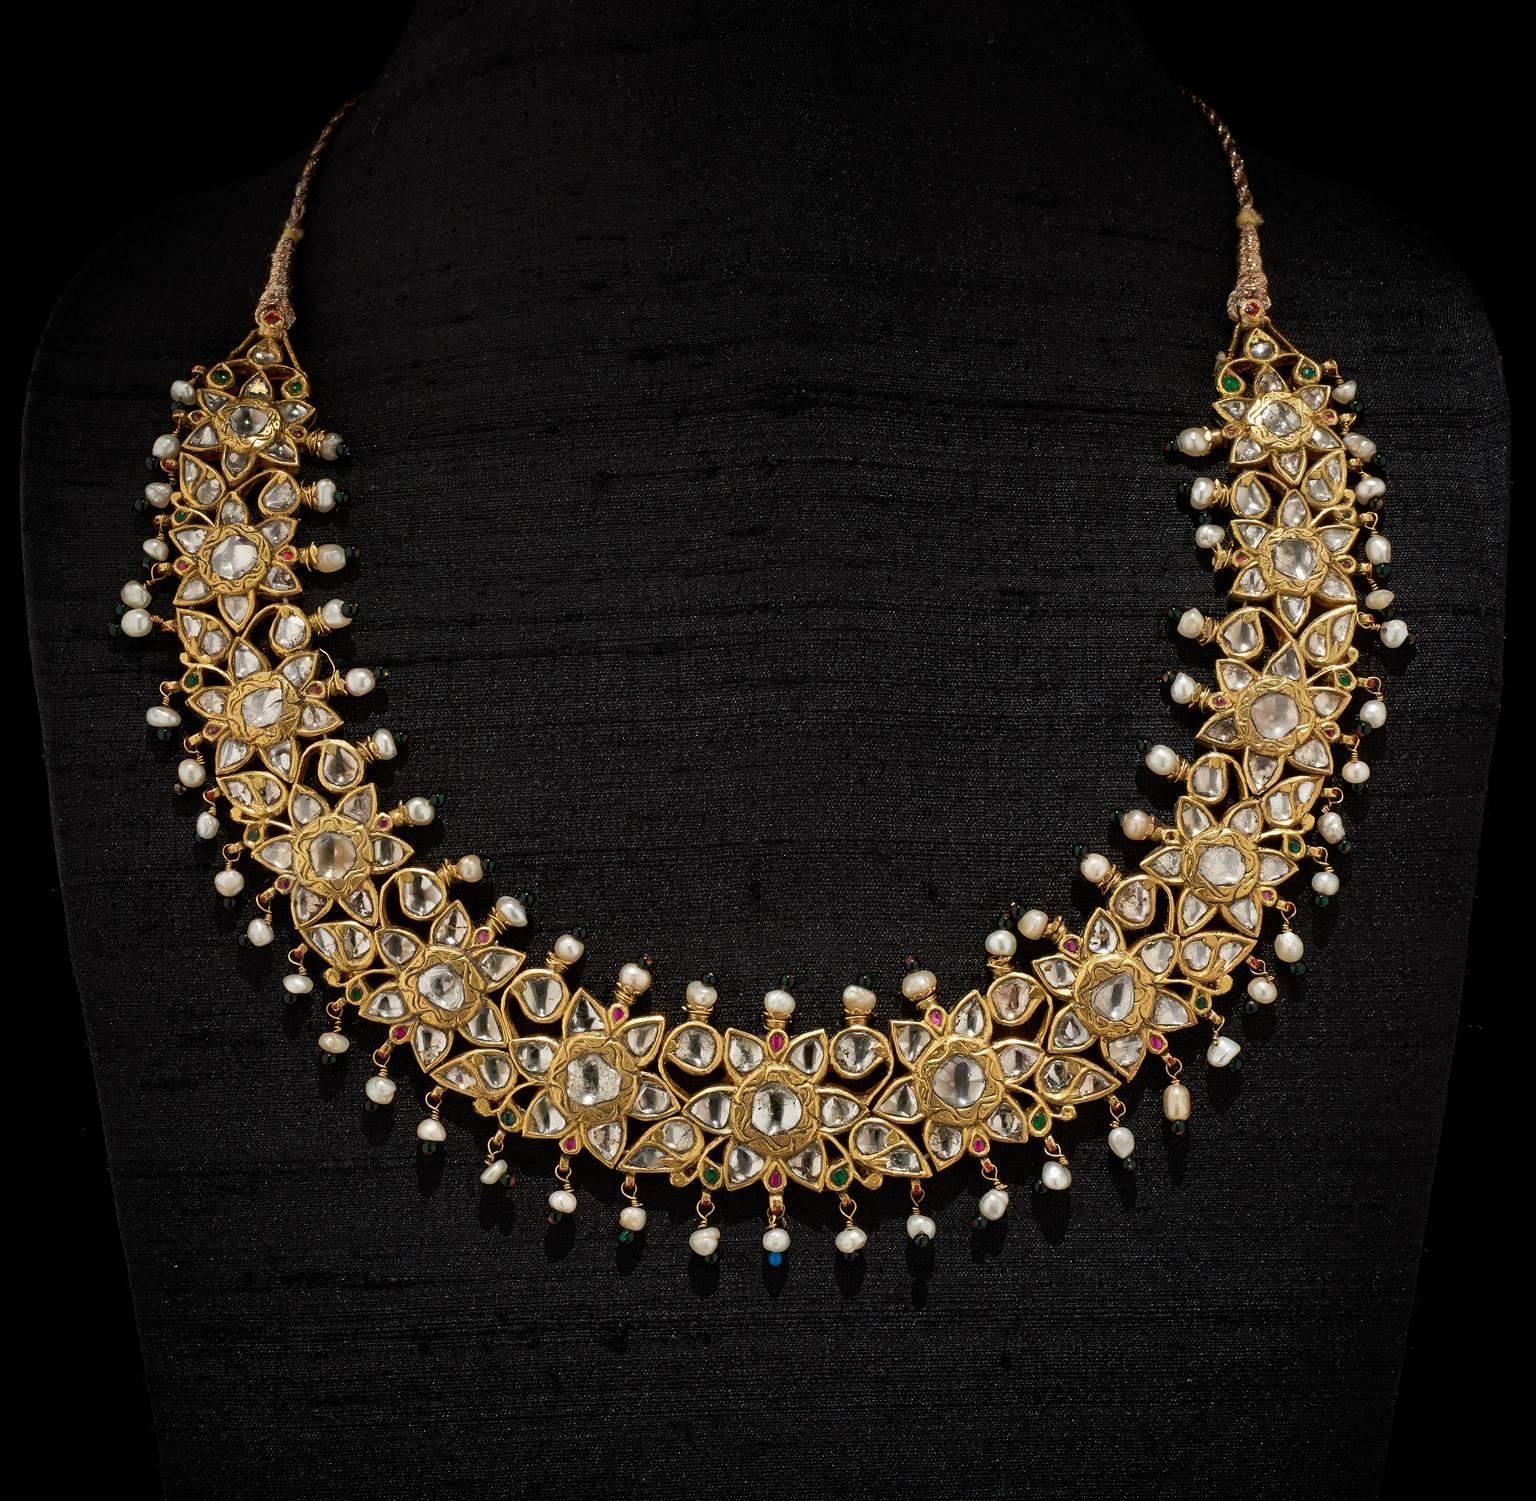 Necklace
Jaipur, Rajasthan, India
20th Century

Fabricated from gold set in kundan (traditional pure gold setting) technique with diamonds in the form of lily flower-heads and leaf motifs. The top and bottom edge are strung with pearls and glass